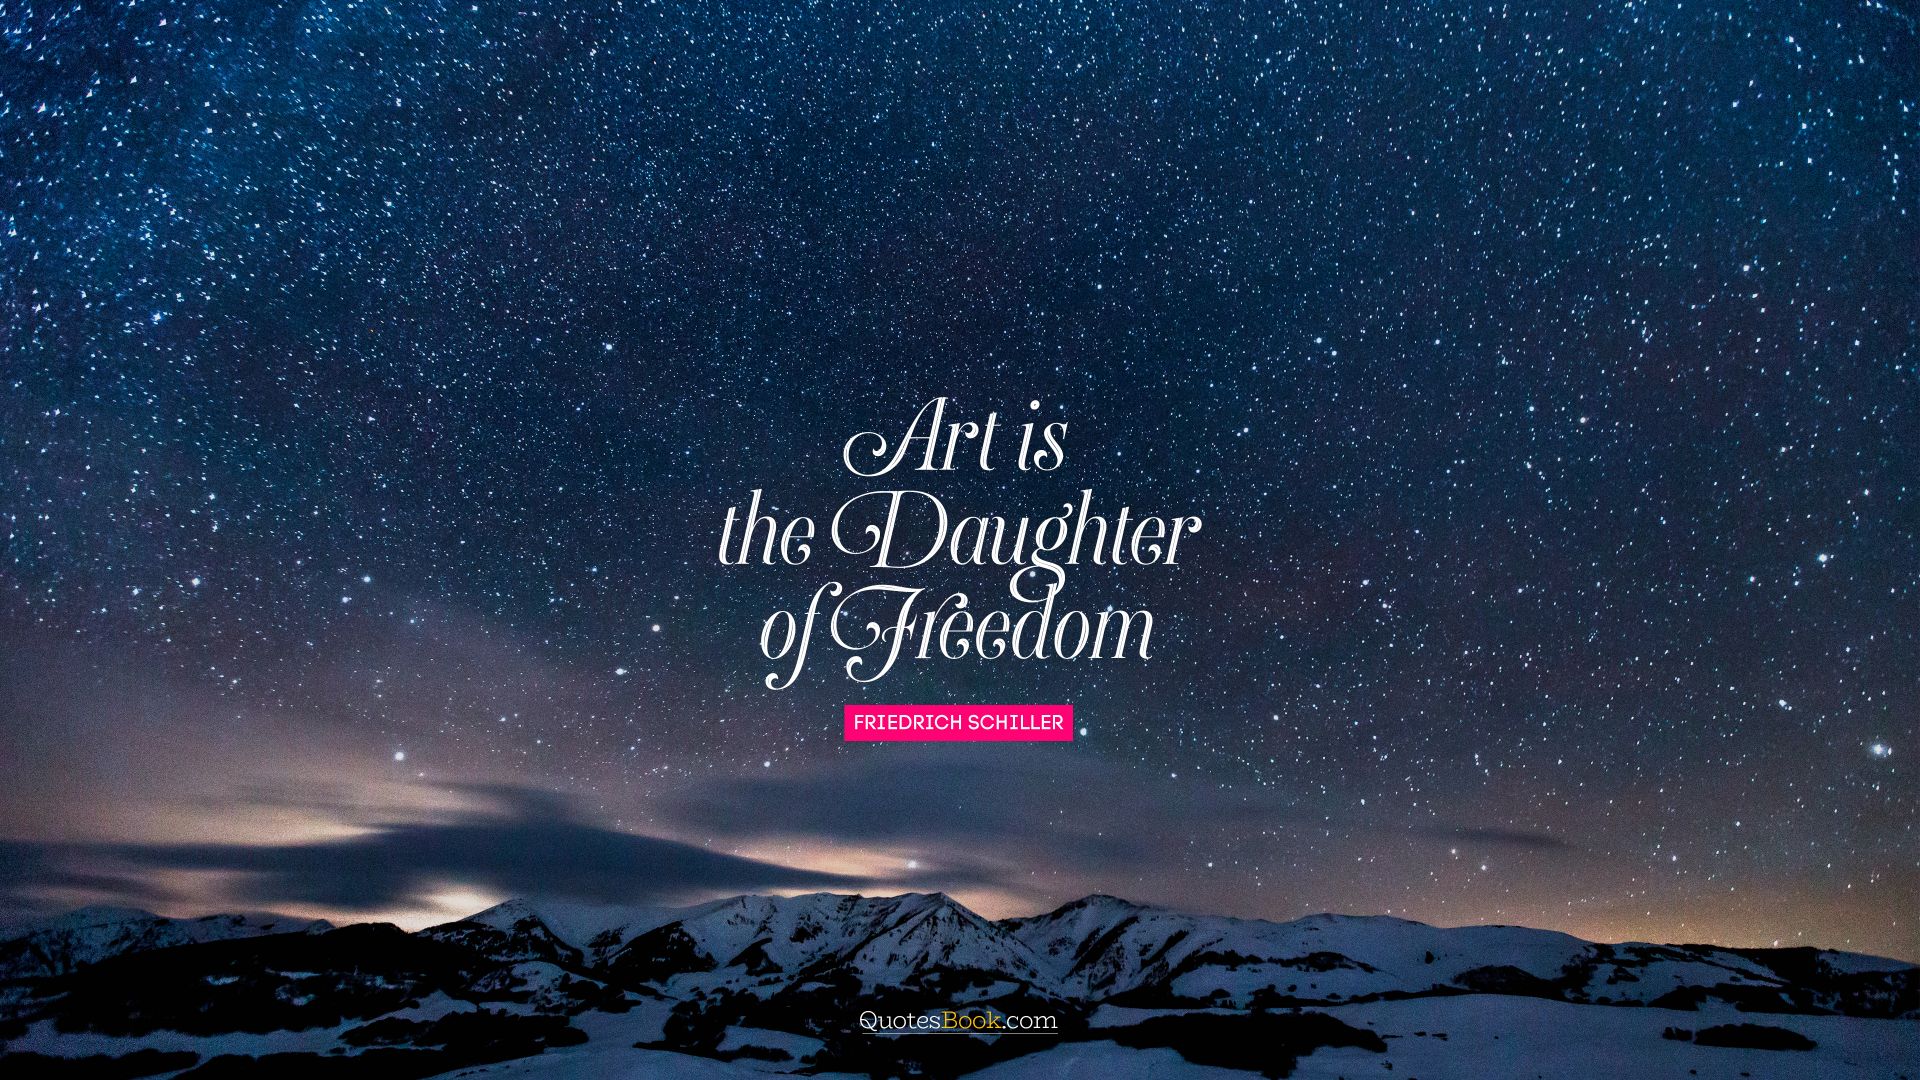 Art is the daughter of freedom. - Quote by Friedrich Schiller